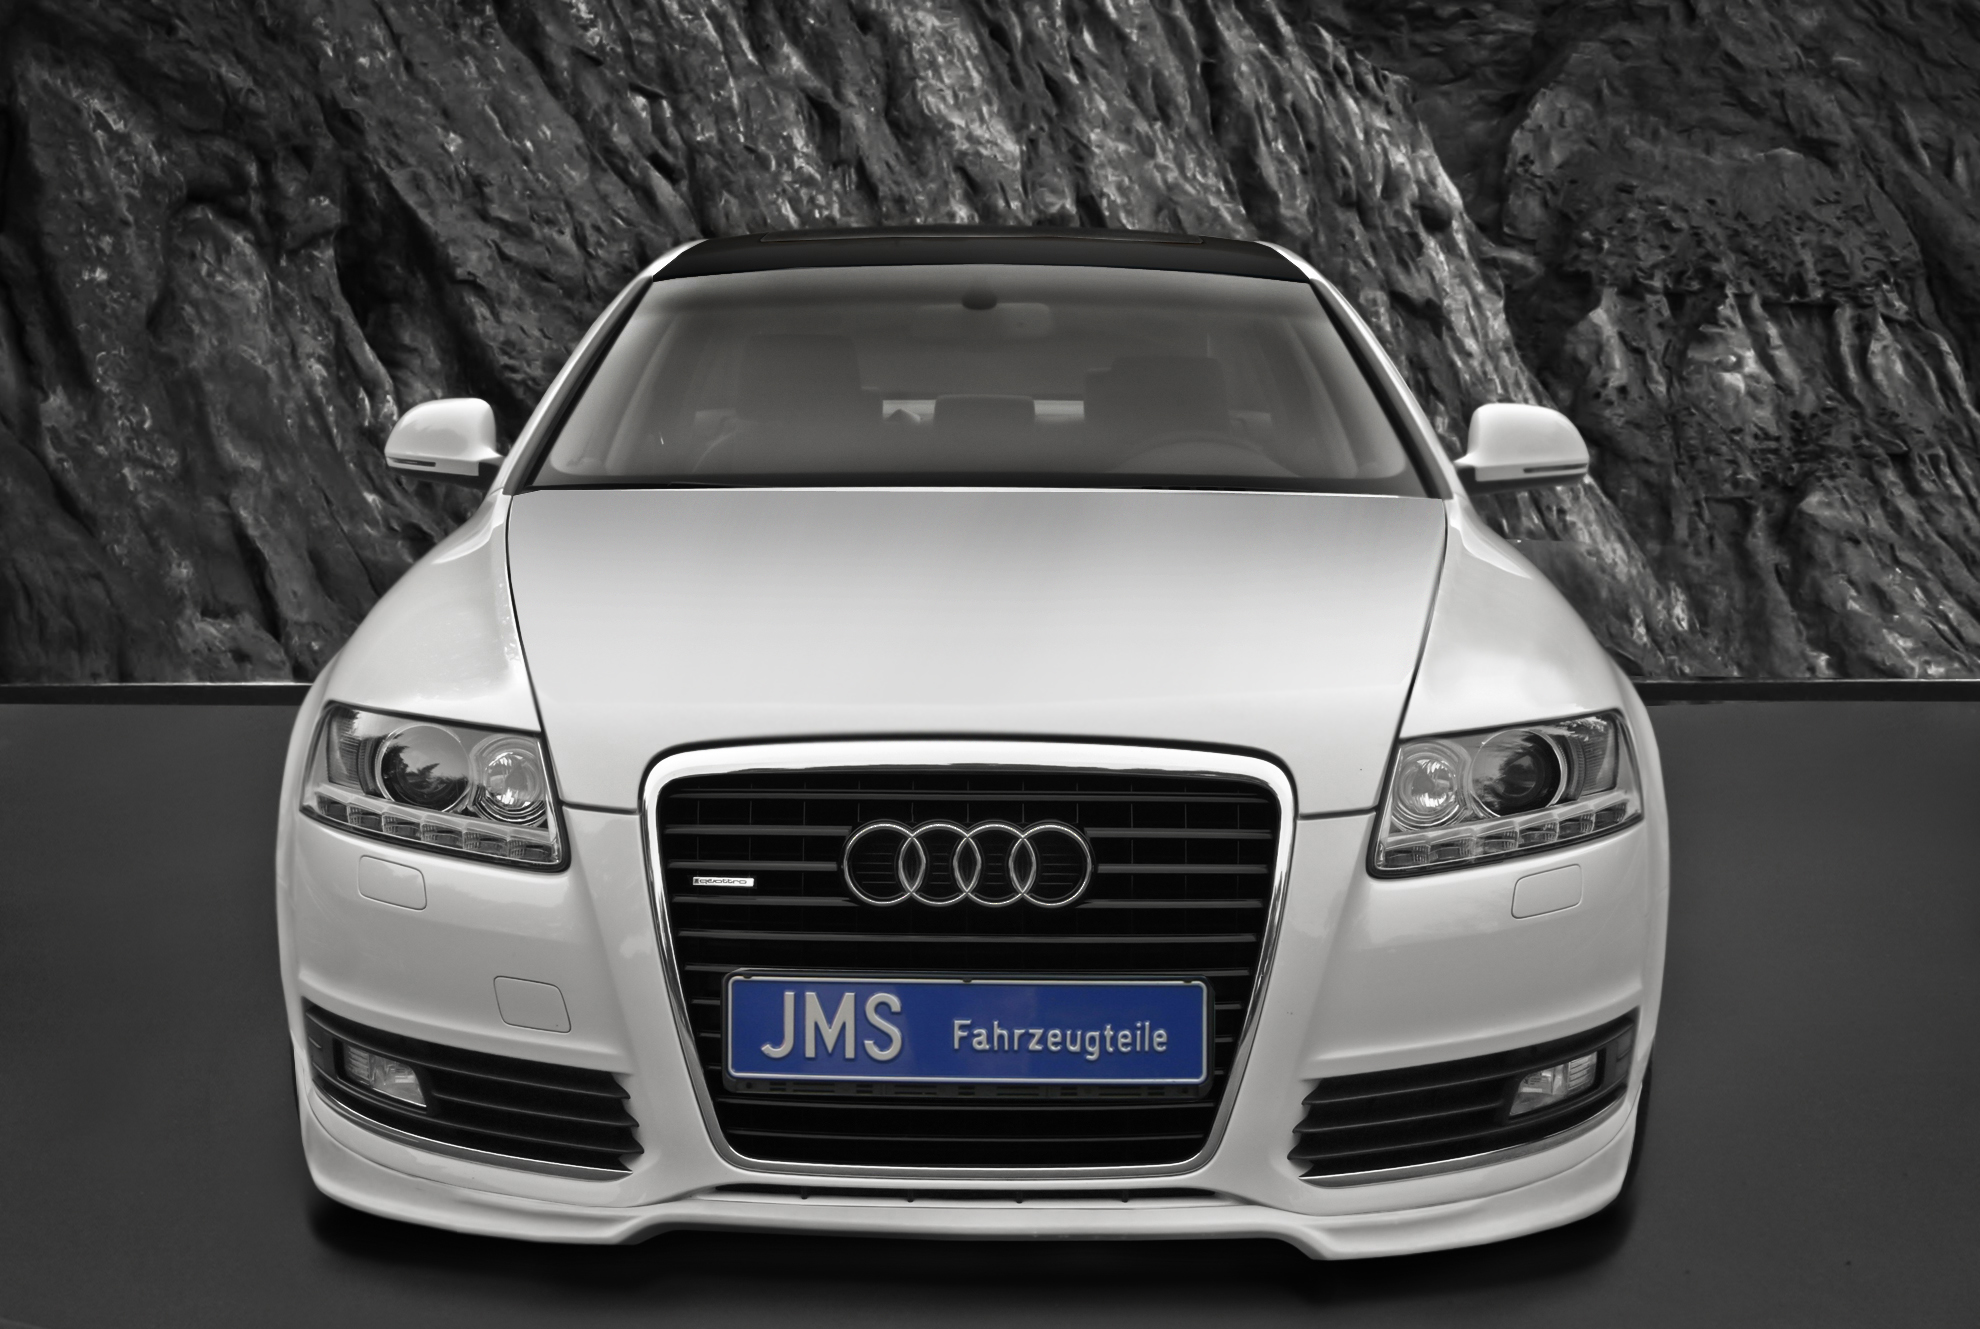 Audi A6 4G Tuning & Styling from JMS, JMS - Fahrzeugteile GmbH, Story -  PresseBox